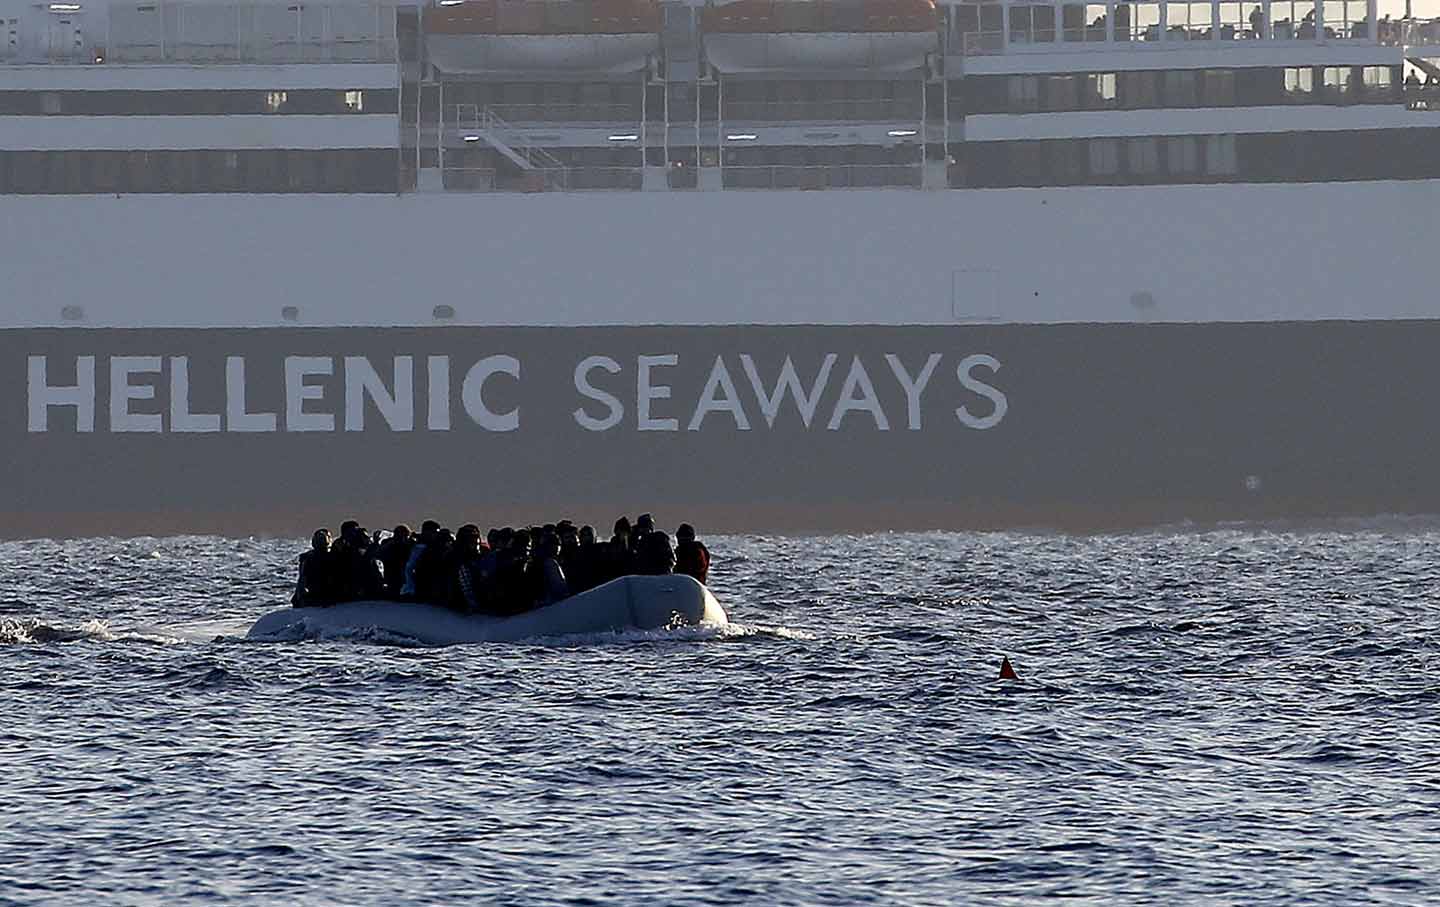 A raft of migrants approaches a beach on the Greek island of Lesbos, November 17, 2015.